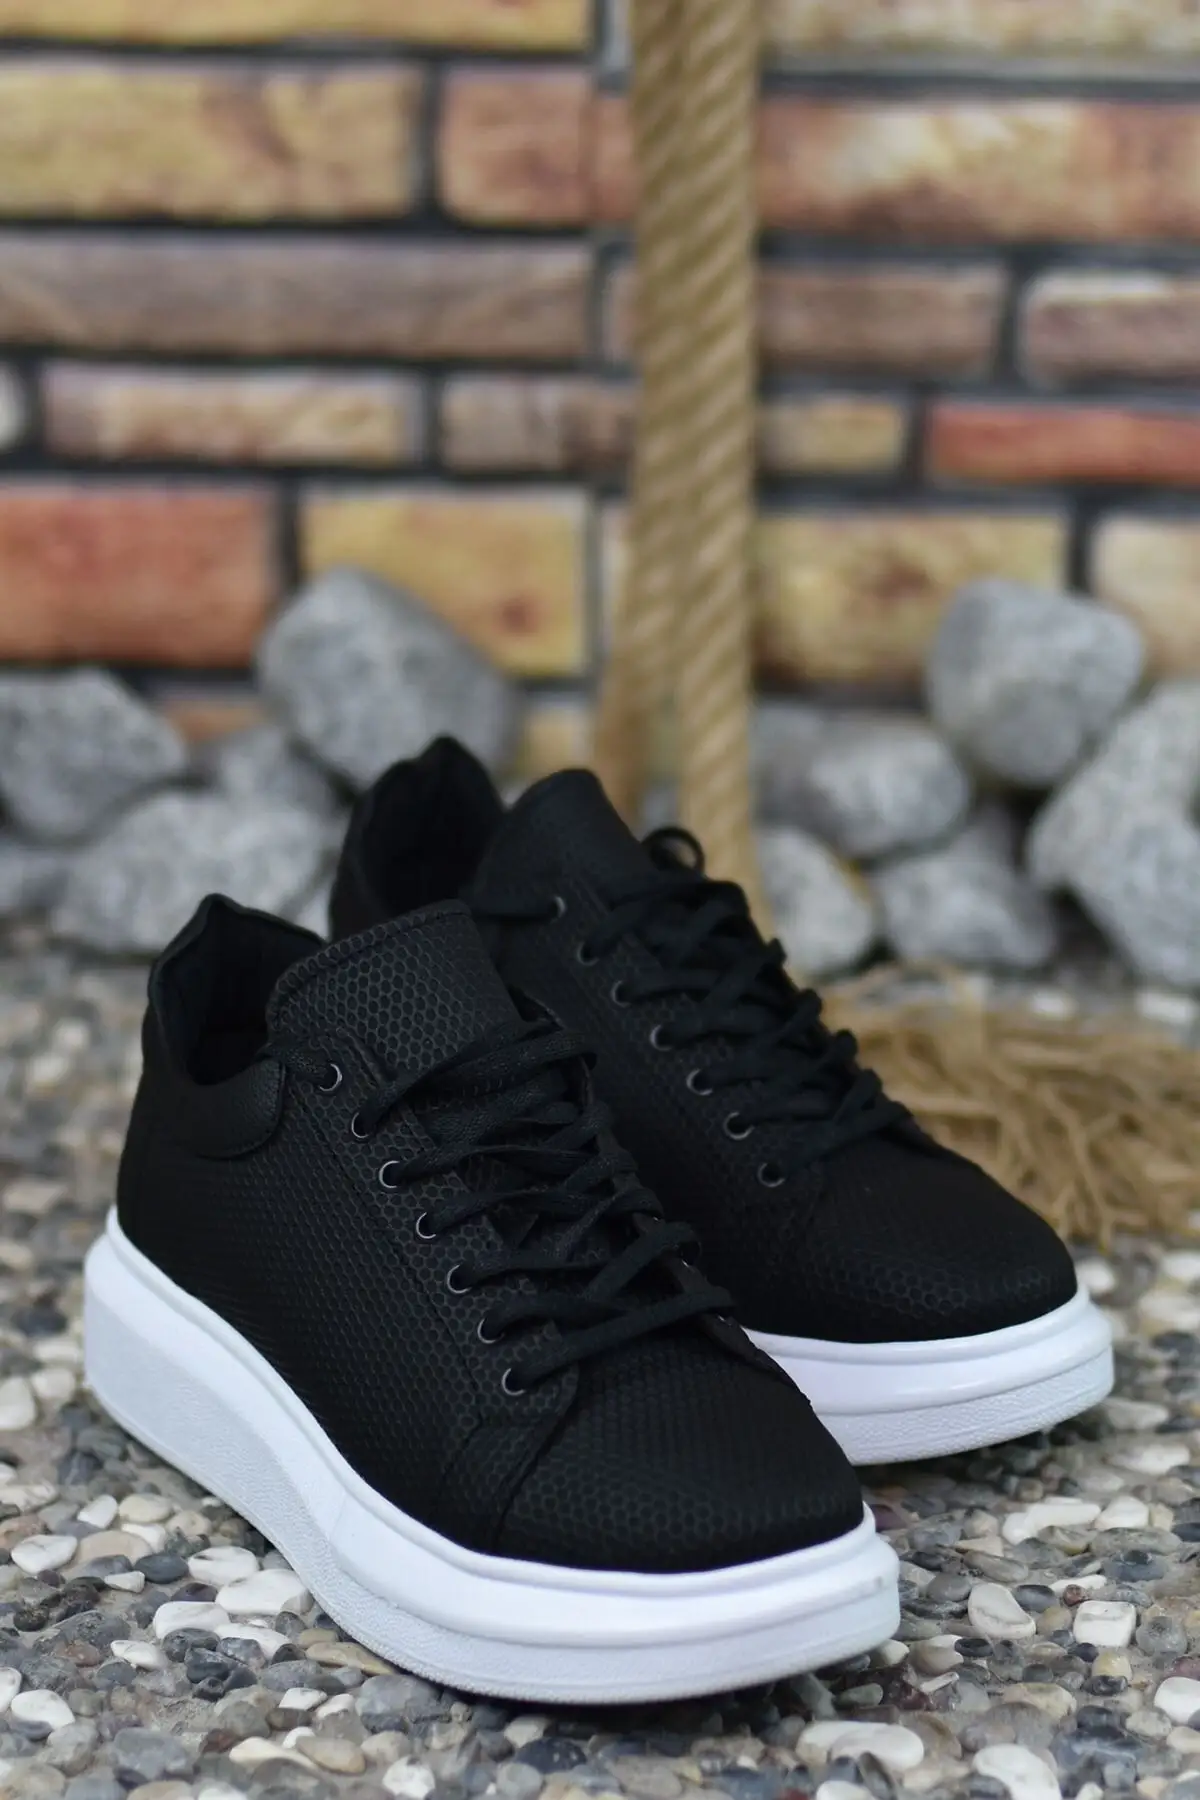 Men 2022 Fashion Thick-Soled Platform Shoes, Men Casual Sports New Sneakers, Black New Sneakers Shoes, Luxury White Design Shoes